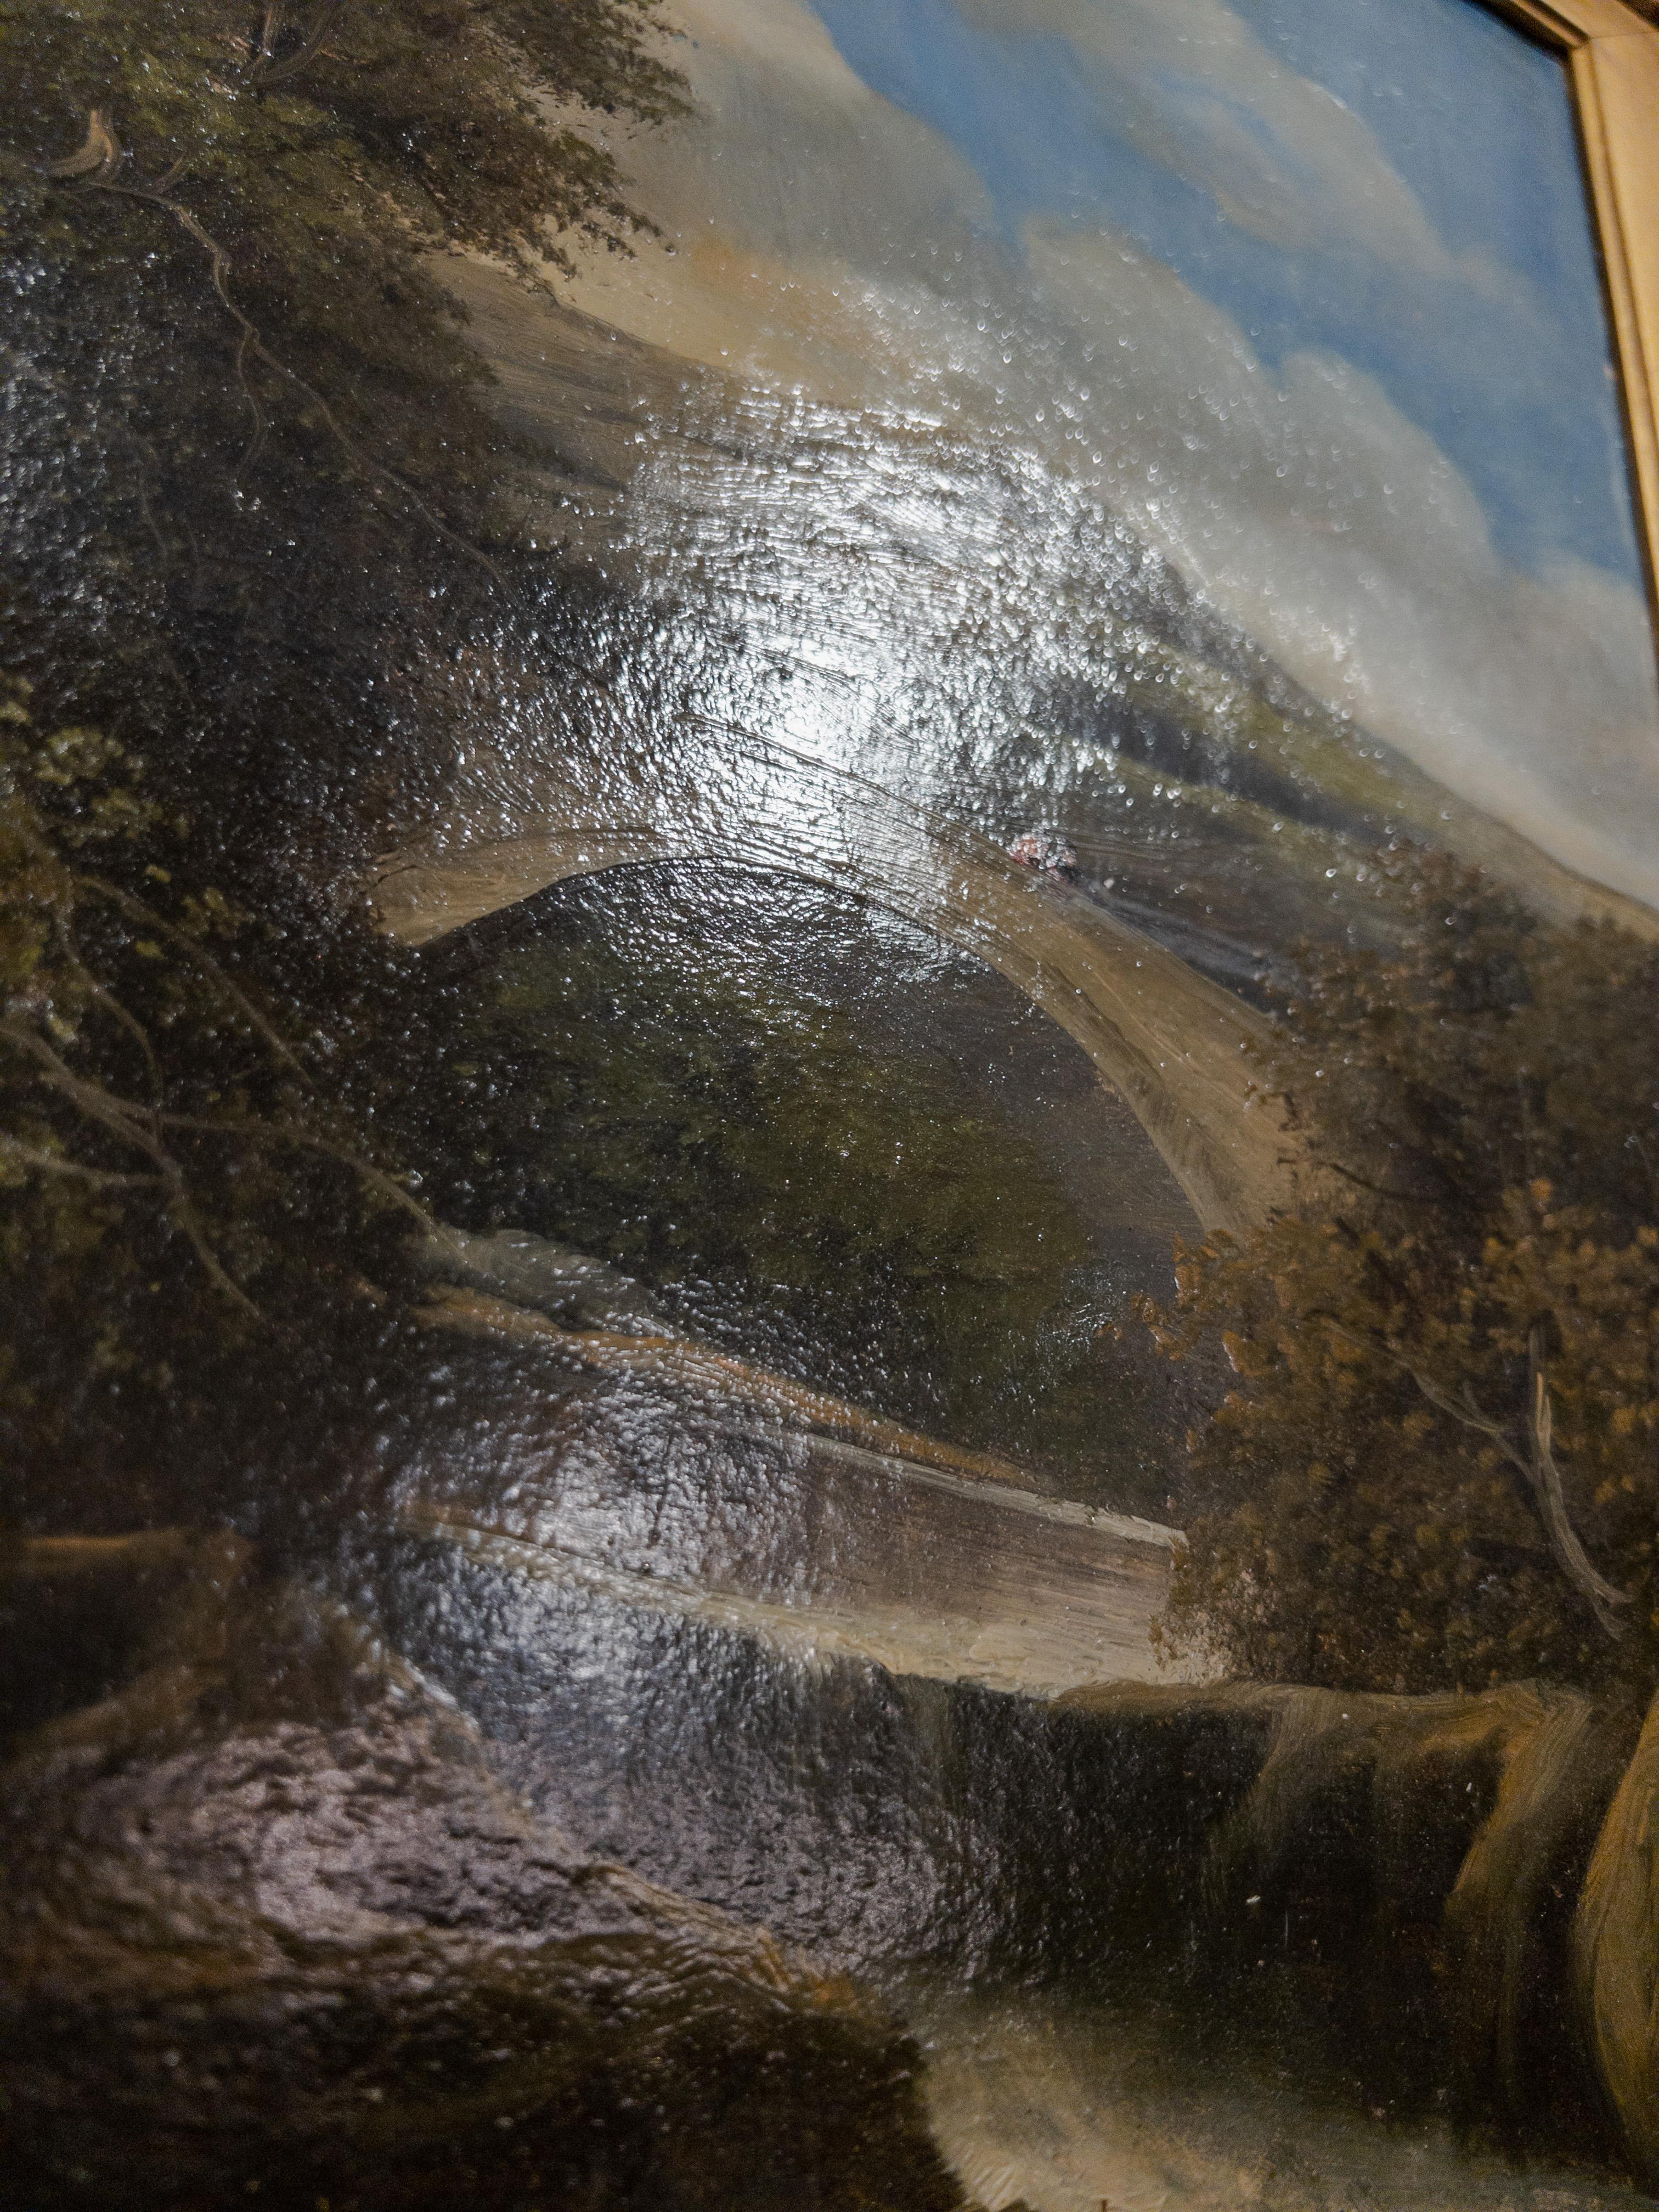 Painted Vintage Oil Painting Entitled “Highland River” by Aaron Gill in a Gilt Frame For Sale